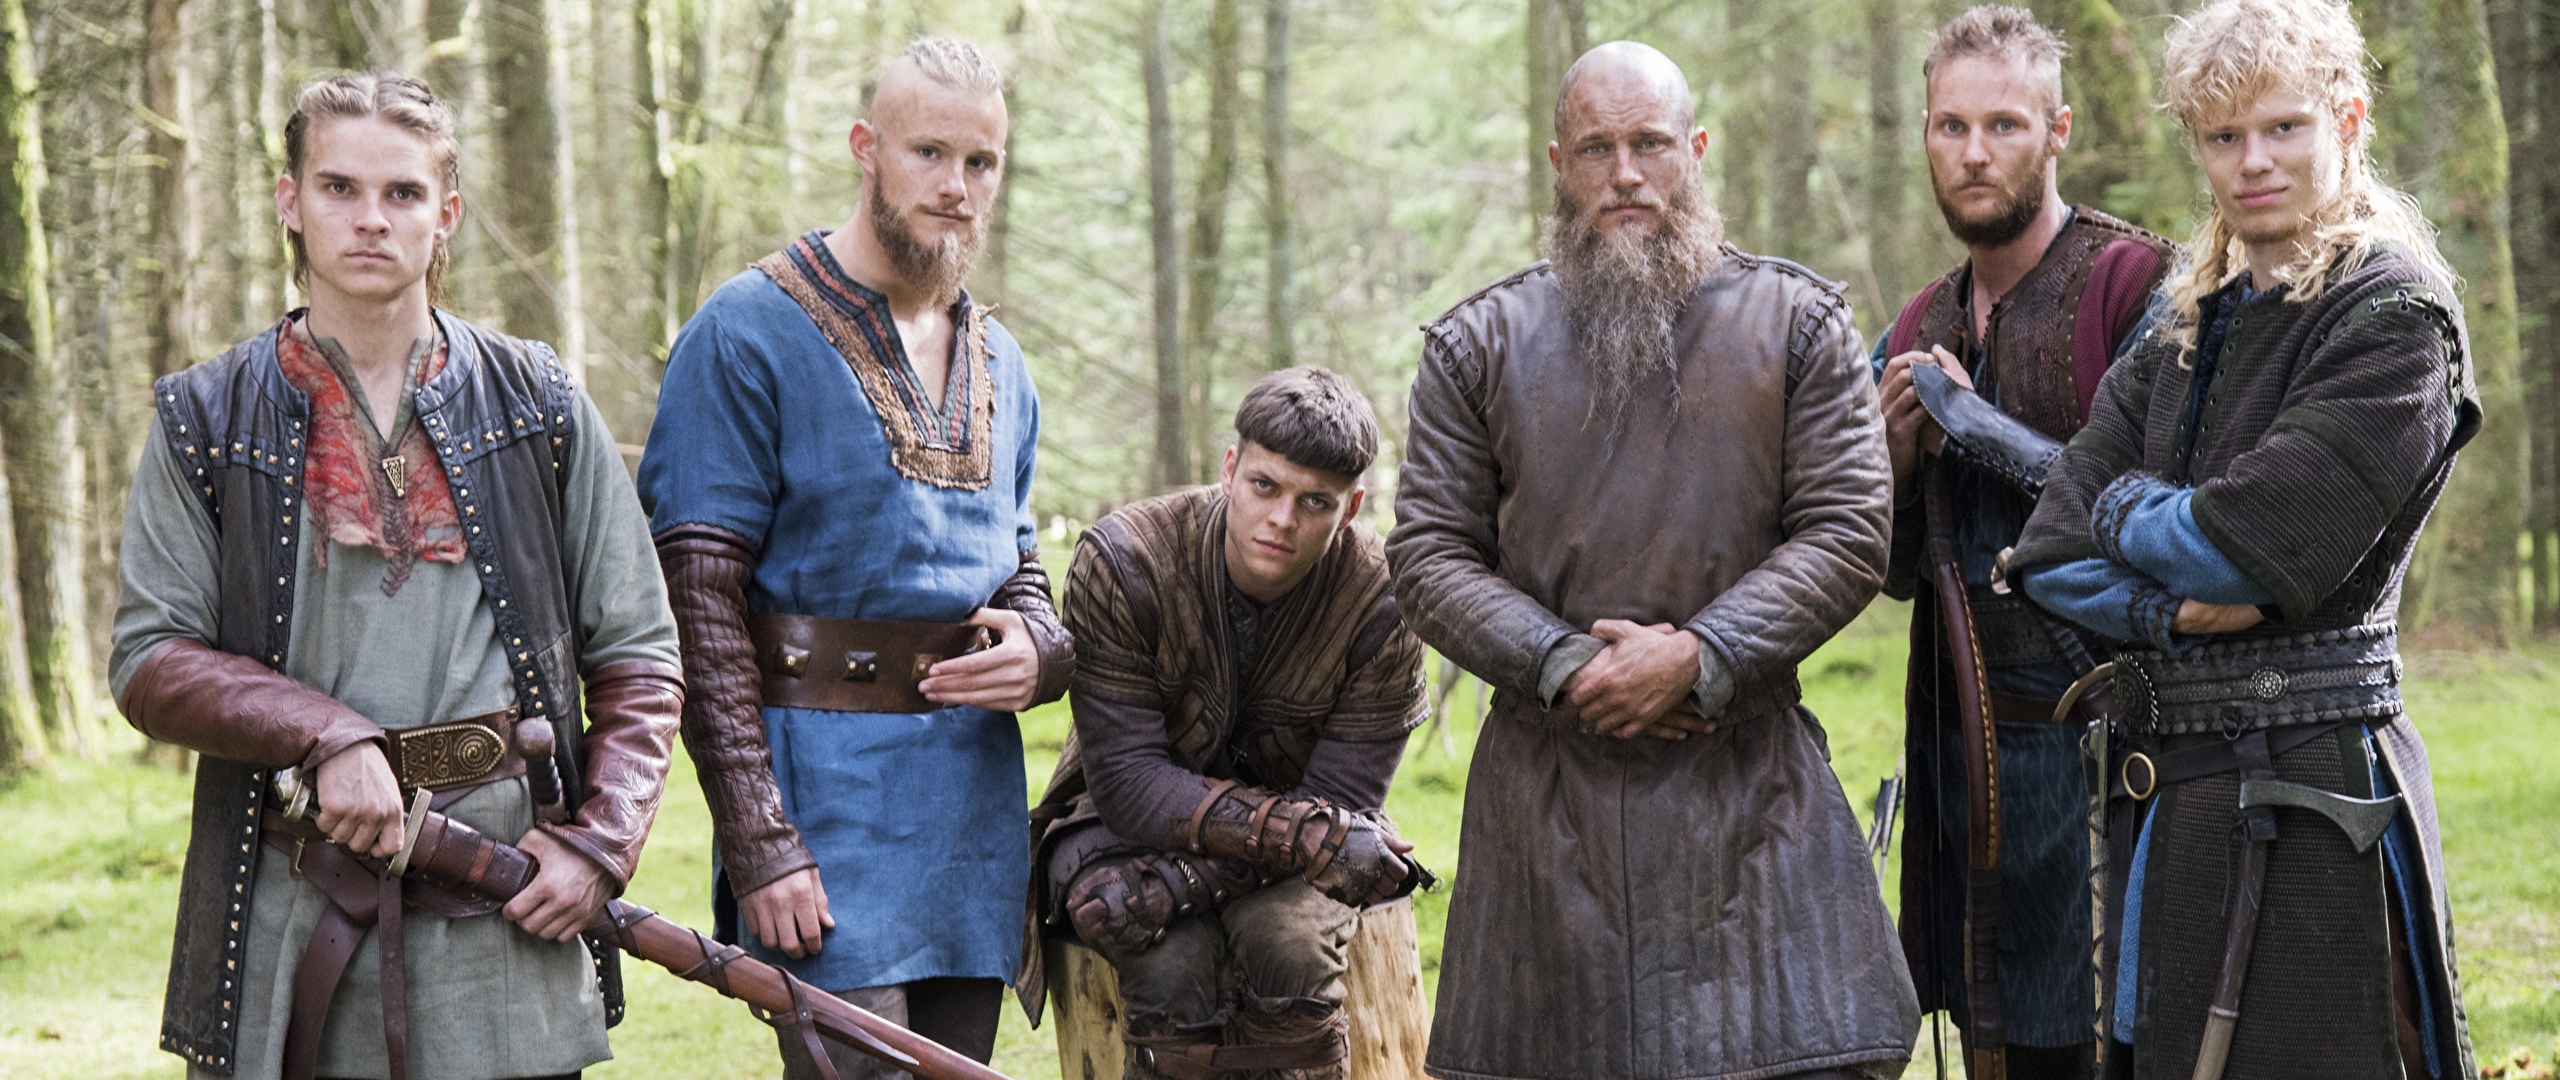 2560 X - Ragnar Lothbrok And Sons , HD Wallpaper & Backgrounds